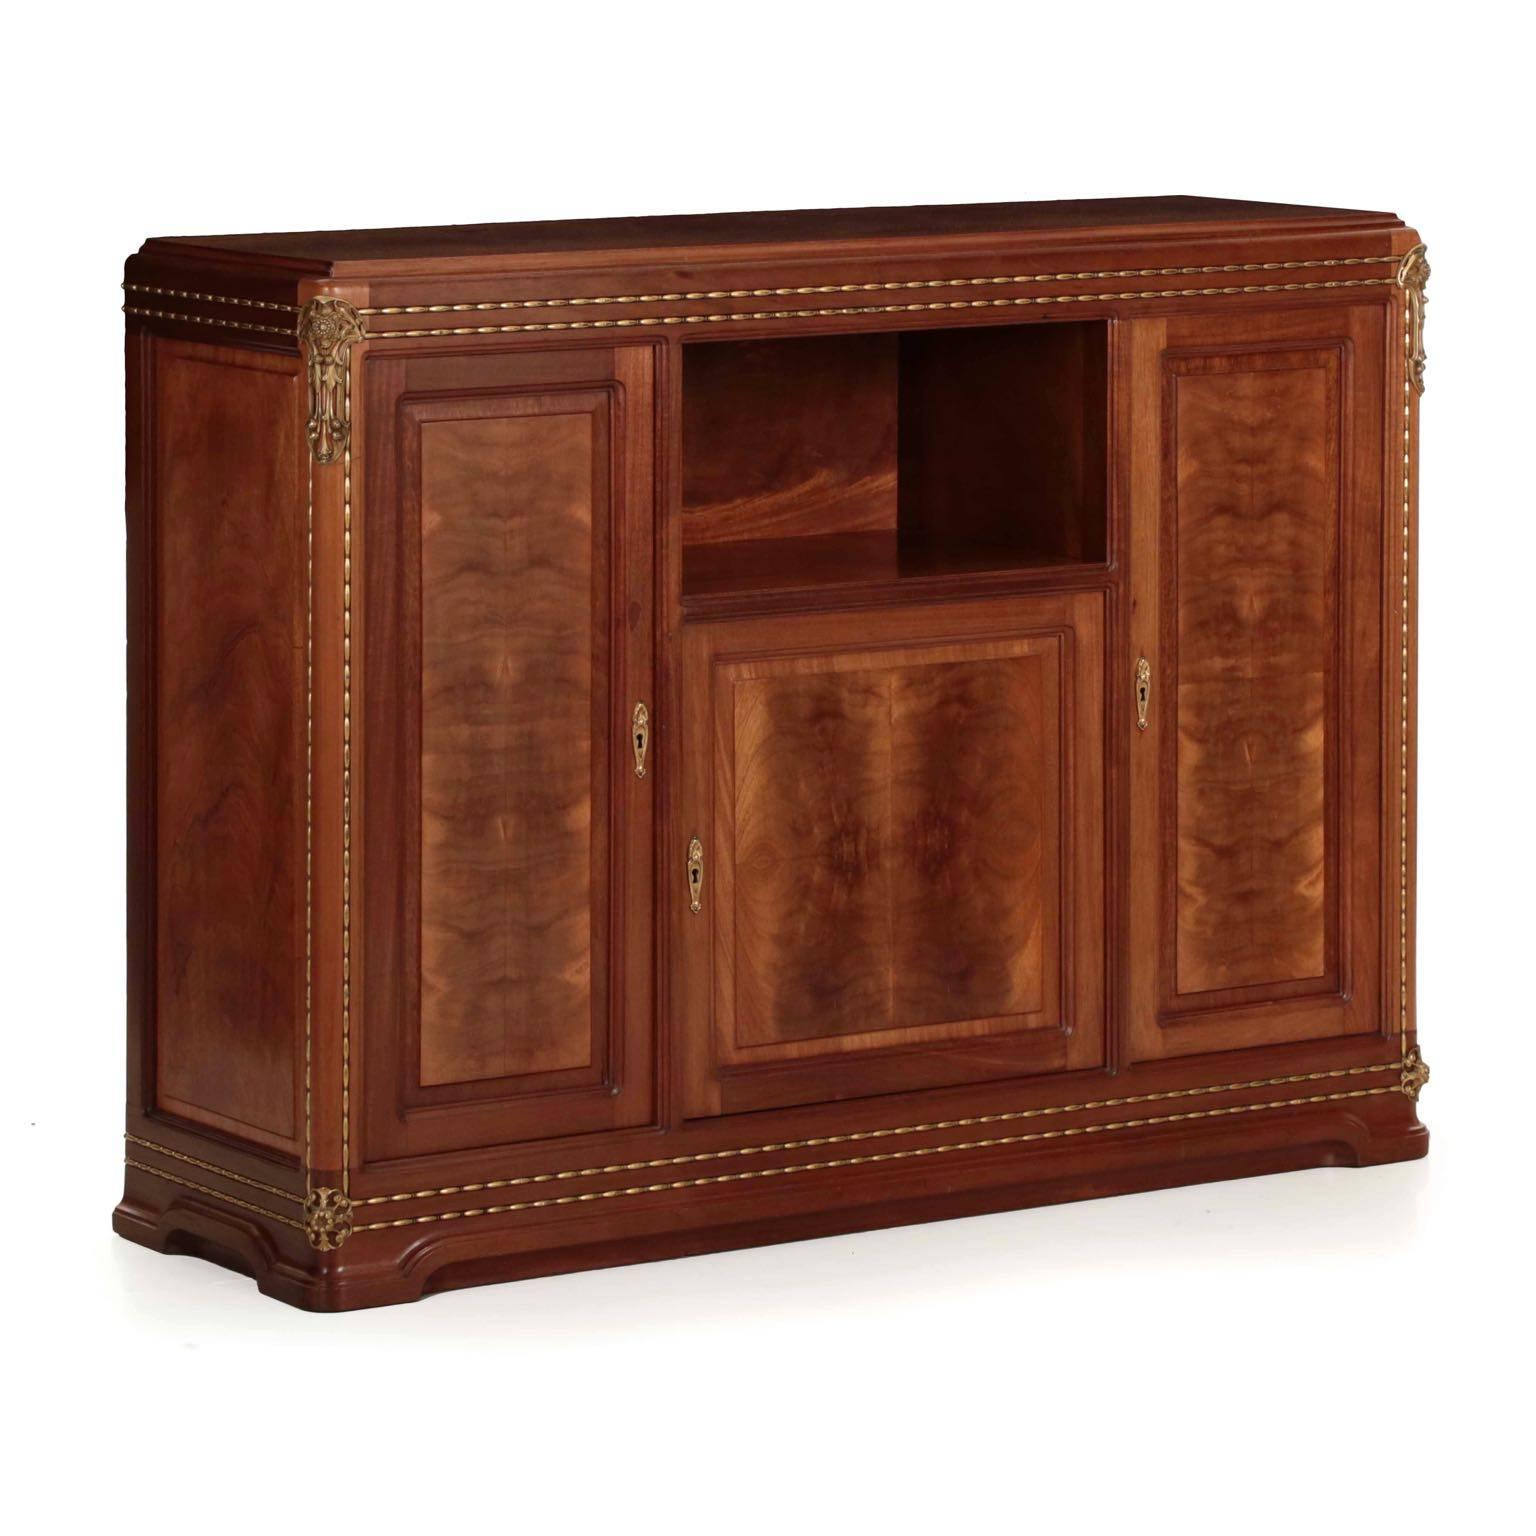 This is an inordinately well crafted piece of furniture. Thick and generous selections of mahogany are carved into organic molded forms inset with a turned ball-and-barrel brass beading that is inordinately crisp and fine. Custom bronze mounts on